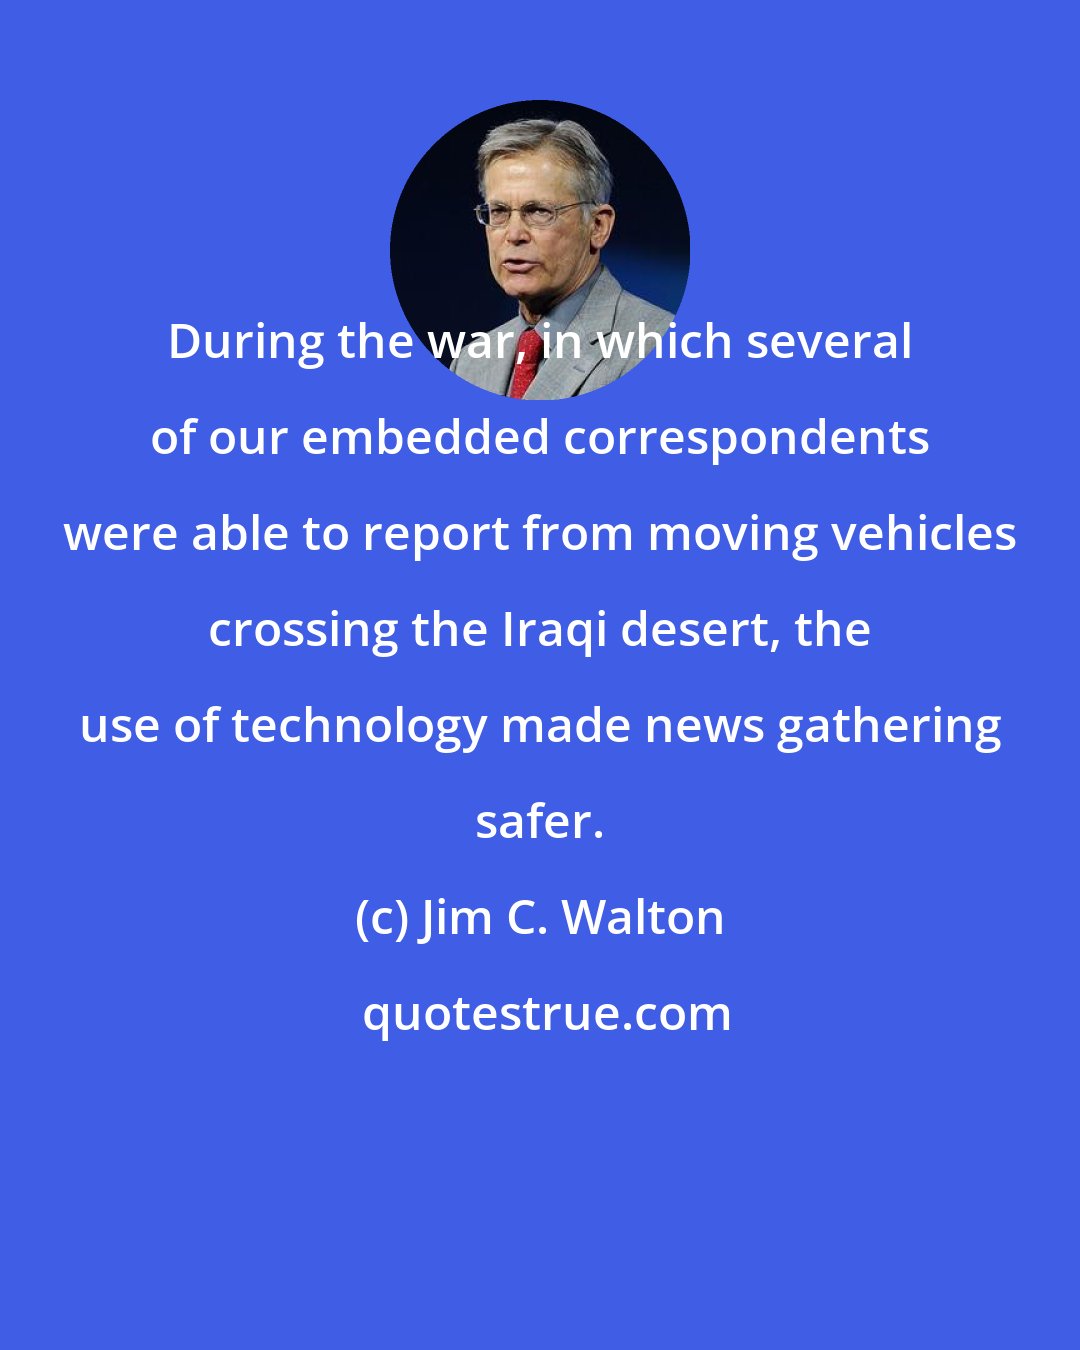 Jim C. Walton: During the war, in which several of our embedded correspondents were able to report from moving vehicles crossing the Iraqi desert, the use of technology made news gathering safer.